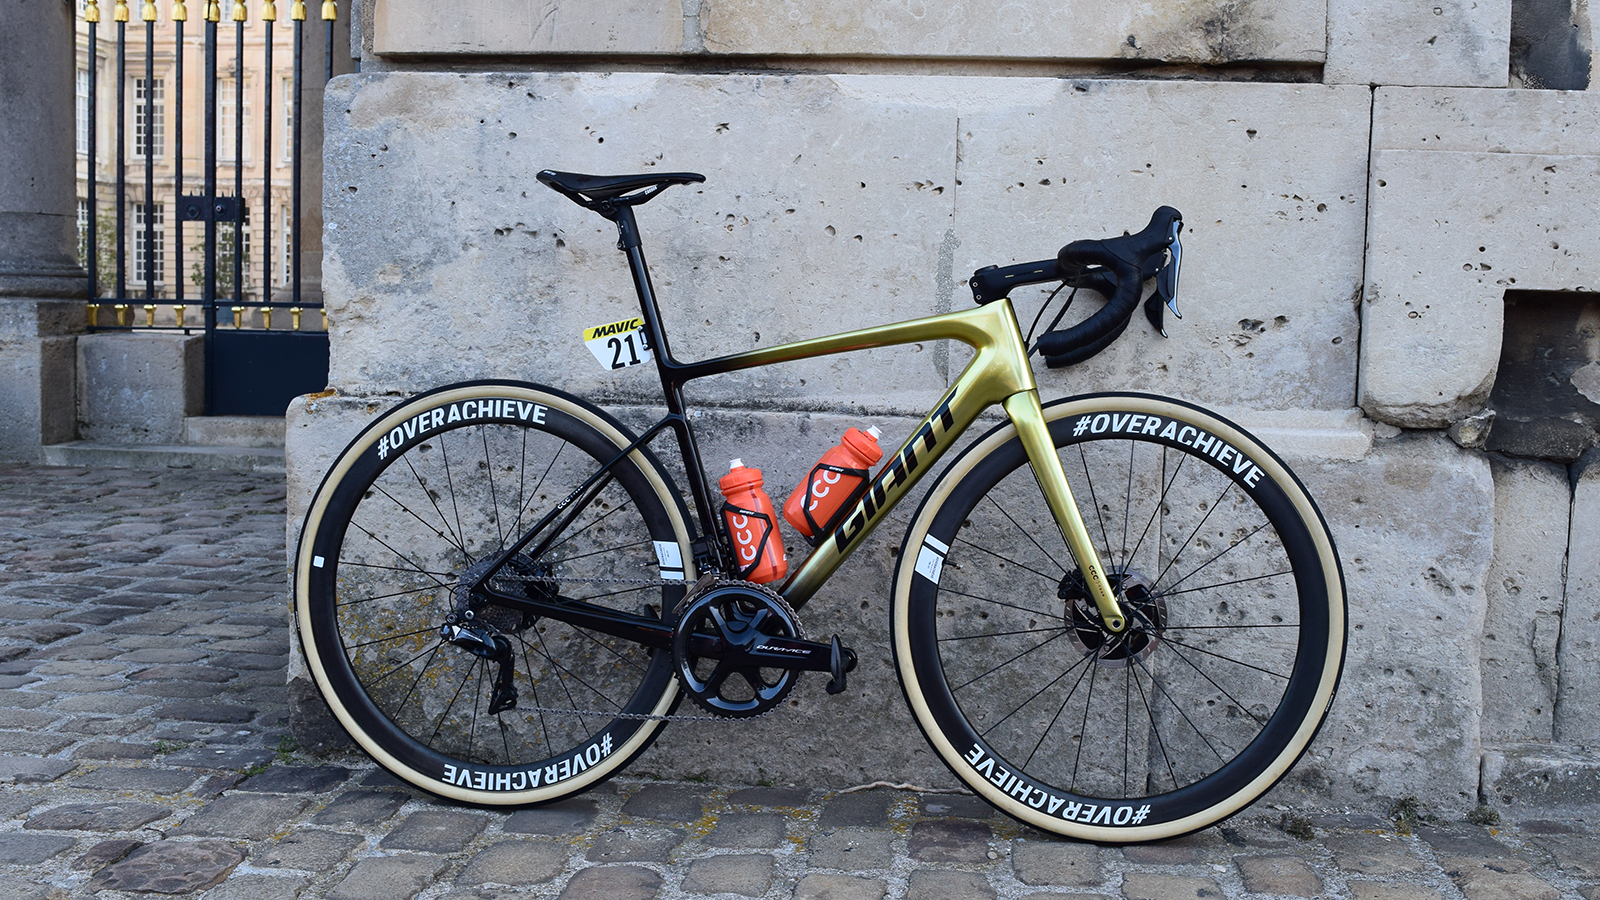 giant defy yellow and black